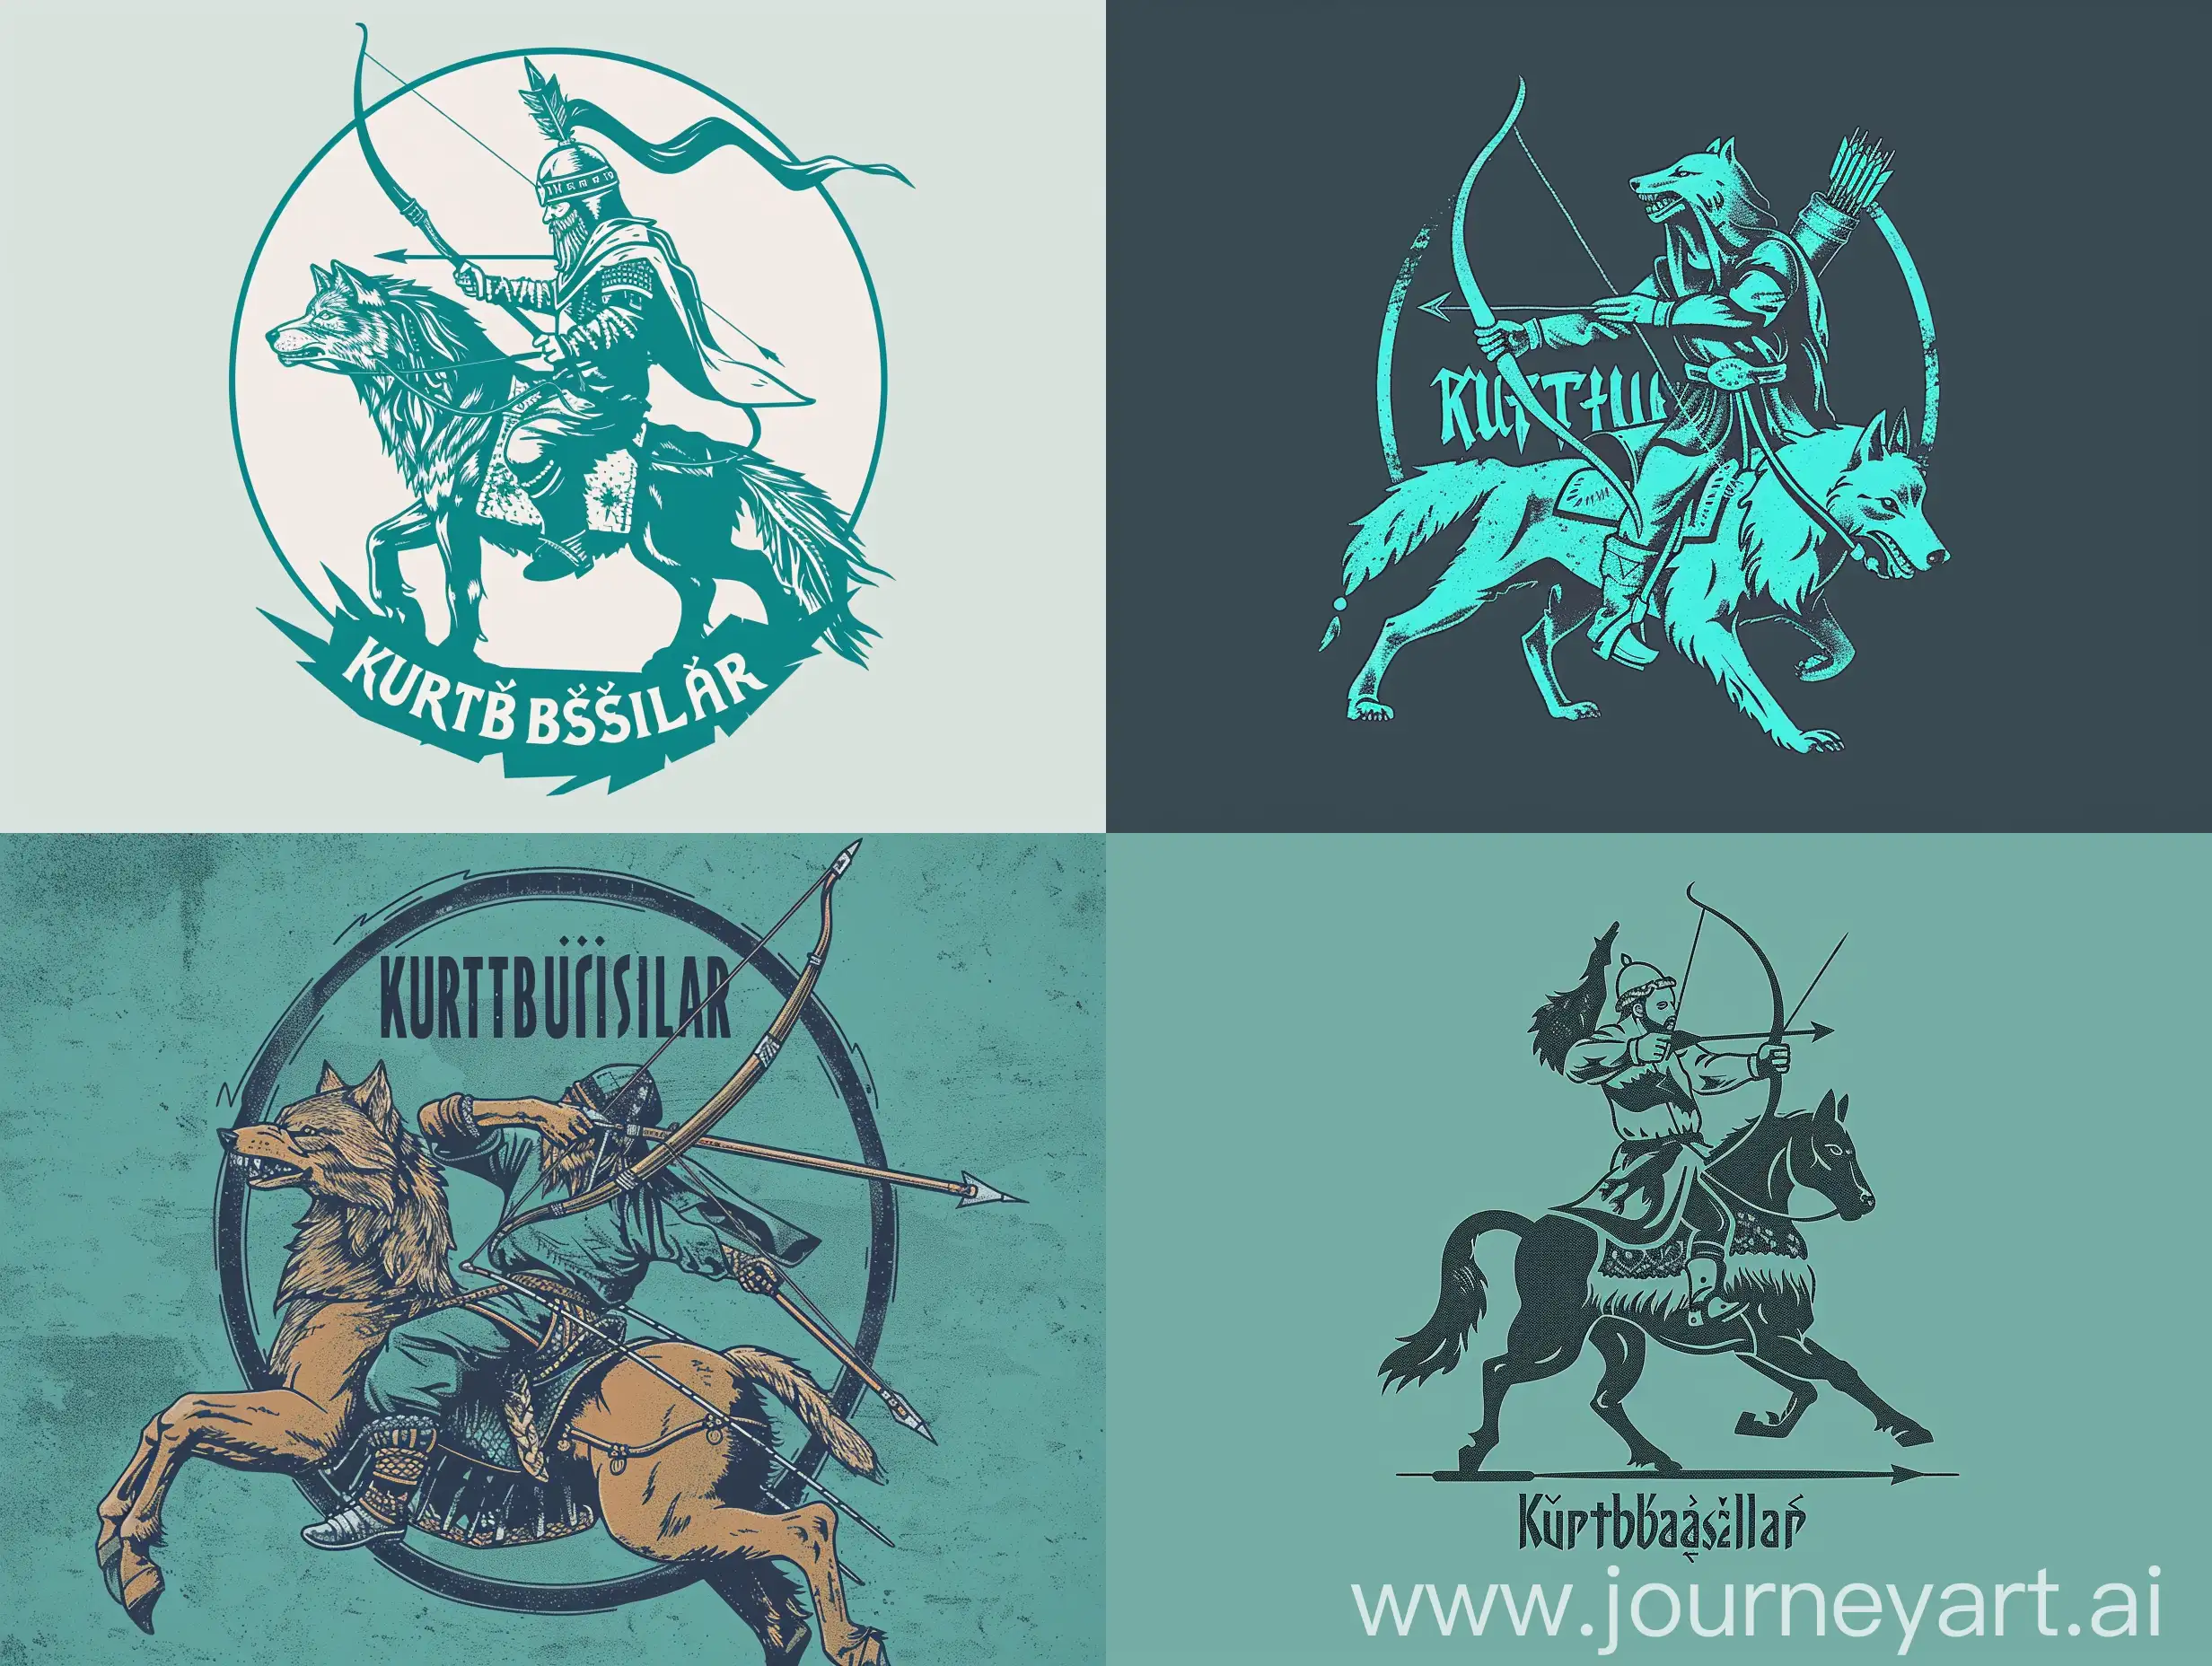 Draw a Mongolian Mounted Archer with a Wolf Helmet, write "Kurtbaşlılar" on it in Turkish and make it a logo in turquoise tones.